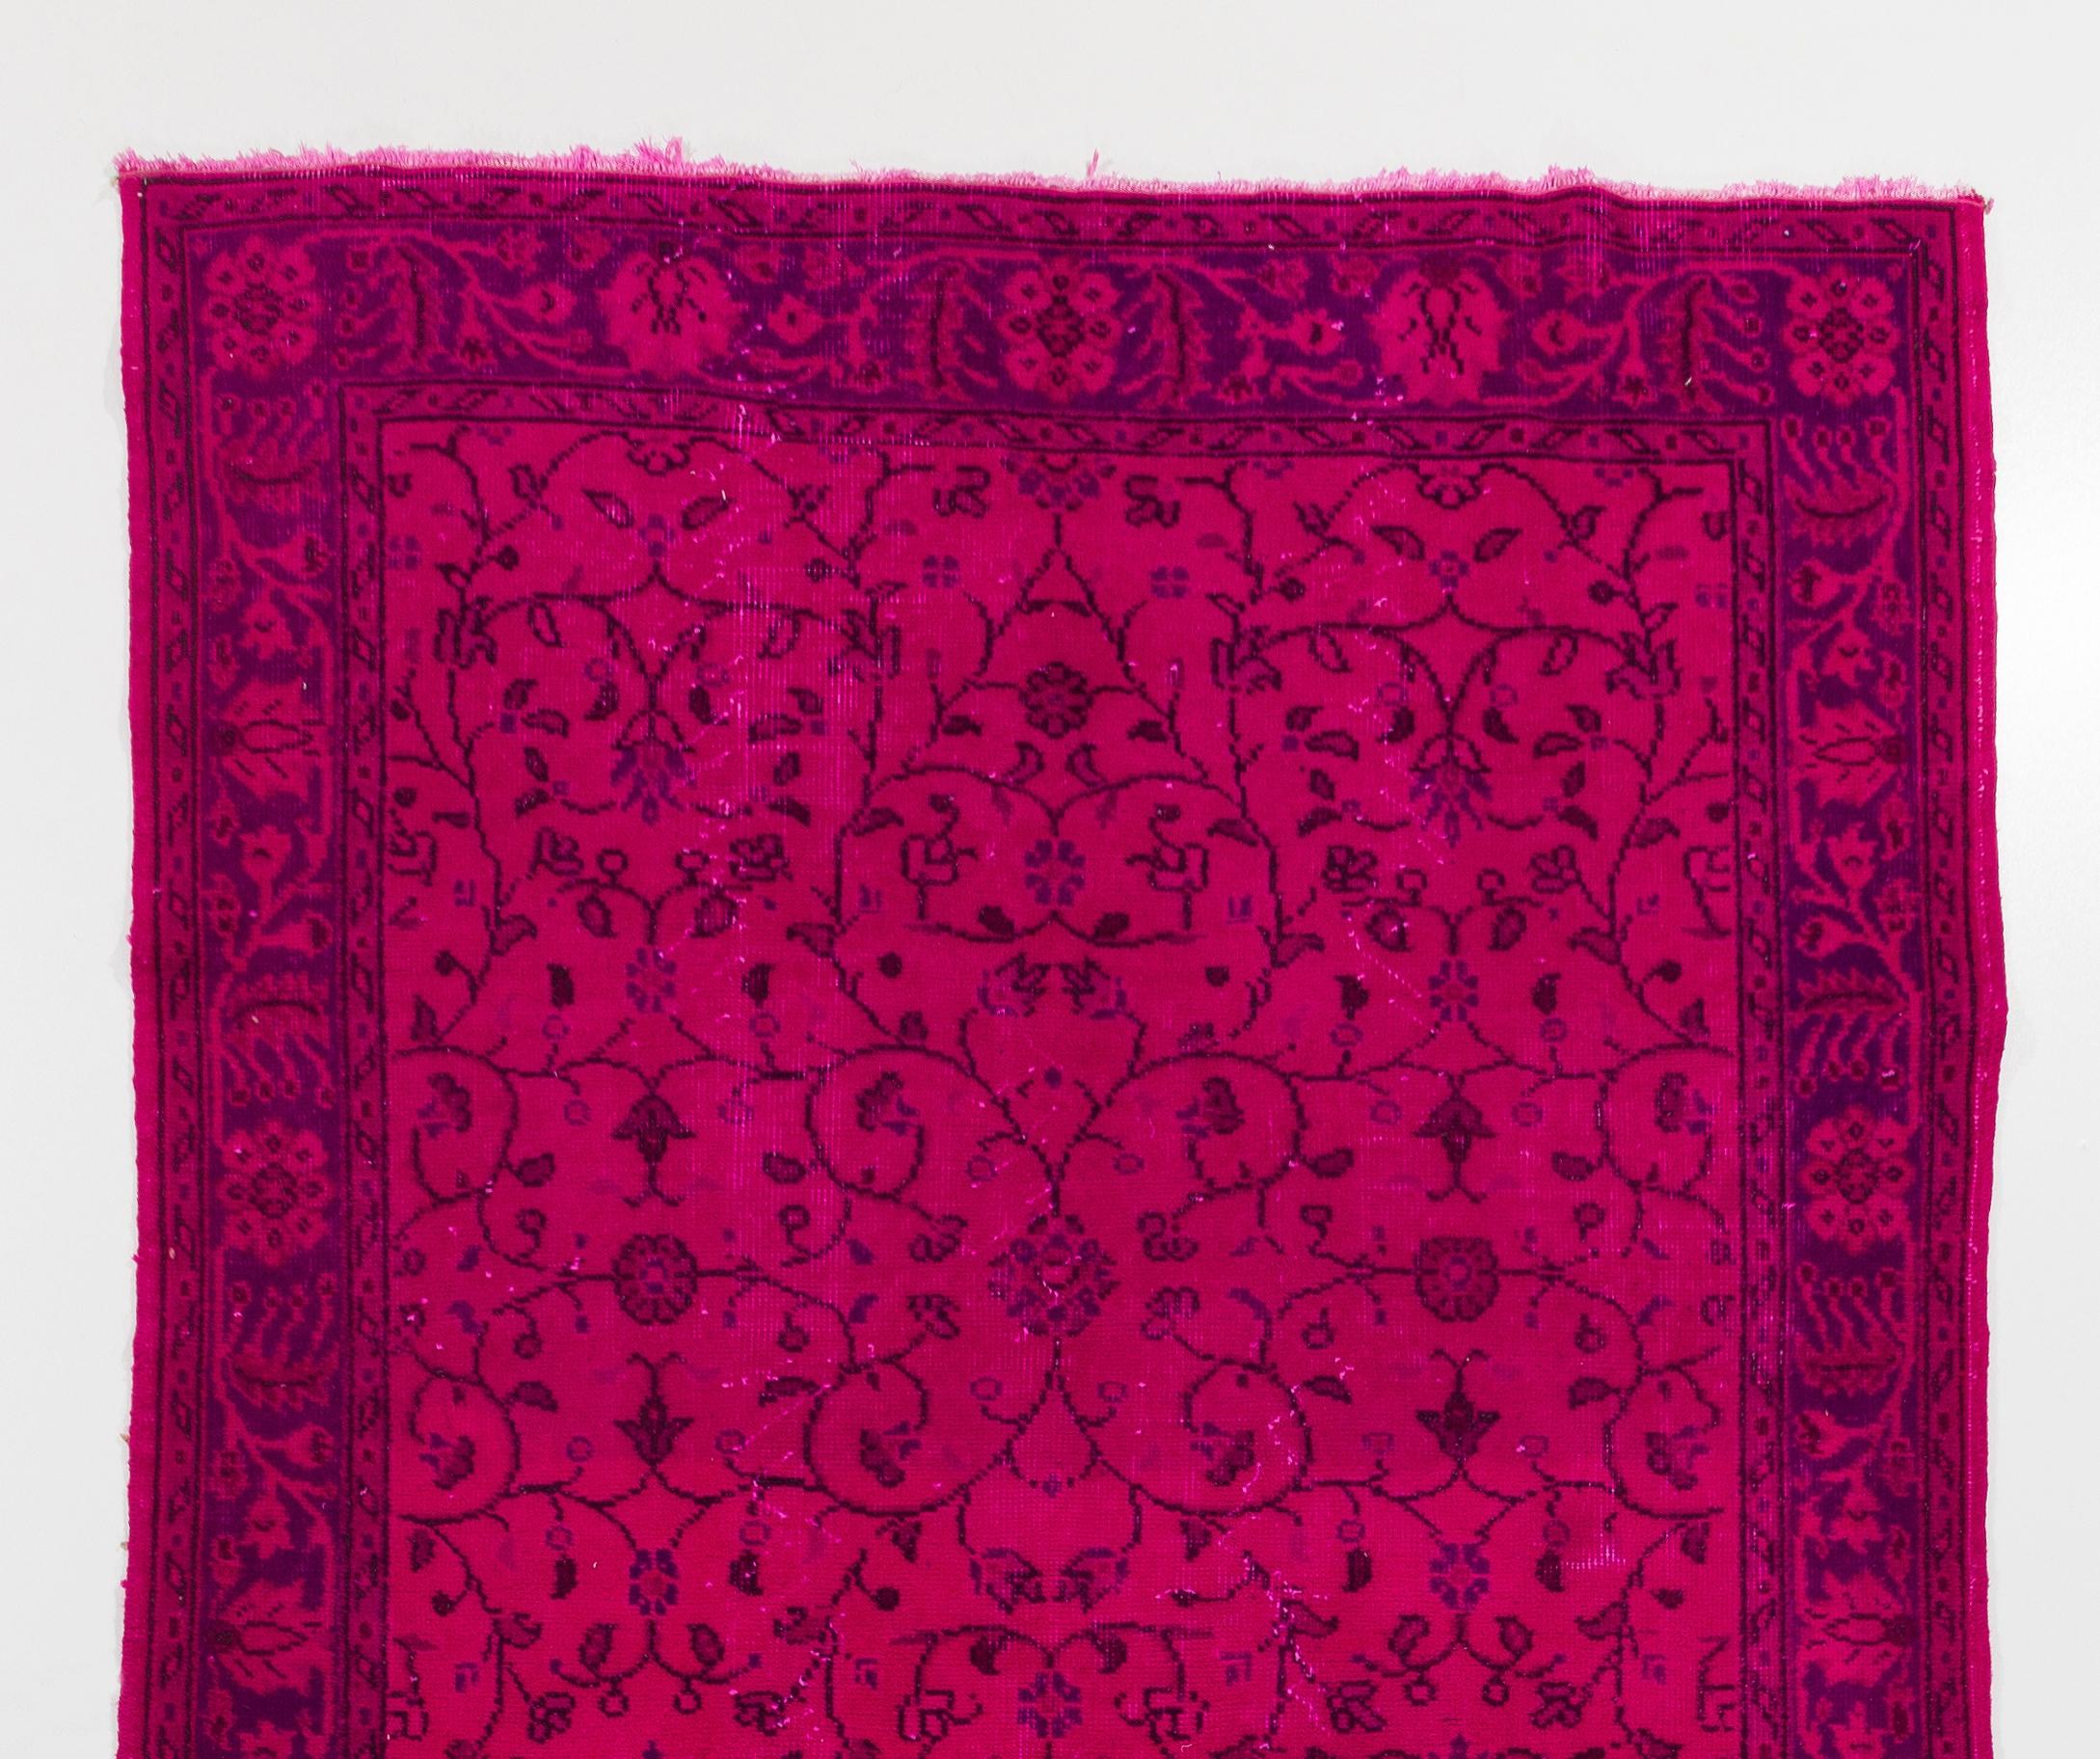 A vintage Turkish runner rug re-dyed in fuchsia pink color. Great for contemporary interiors.
Finely hand knotted, low wool pile on cotton foundation. Professionally washed.
Sturdy and can be used on a high traffic area, suitable for both